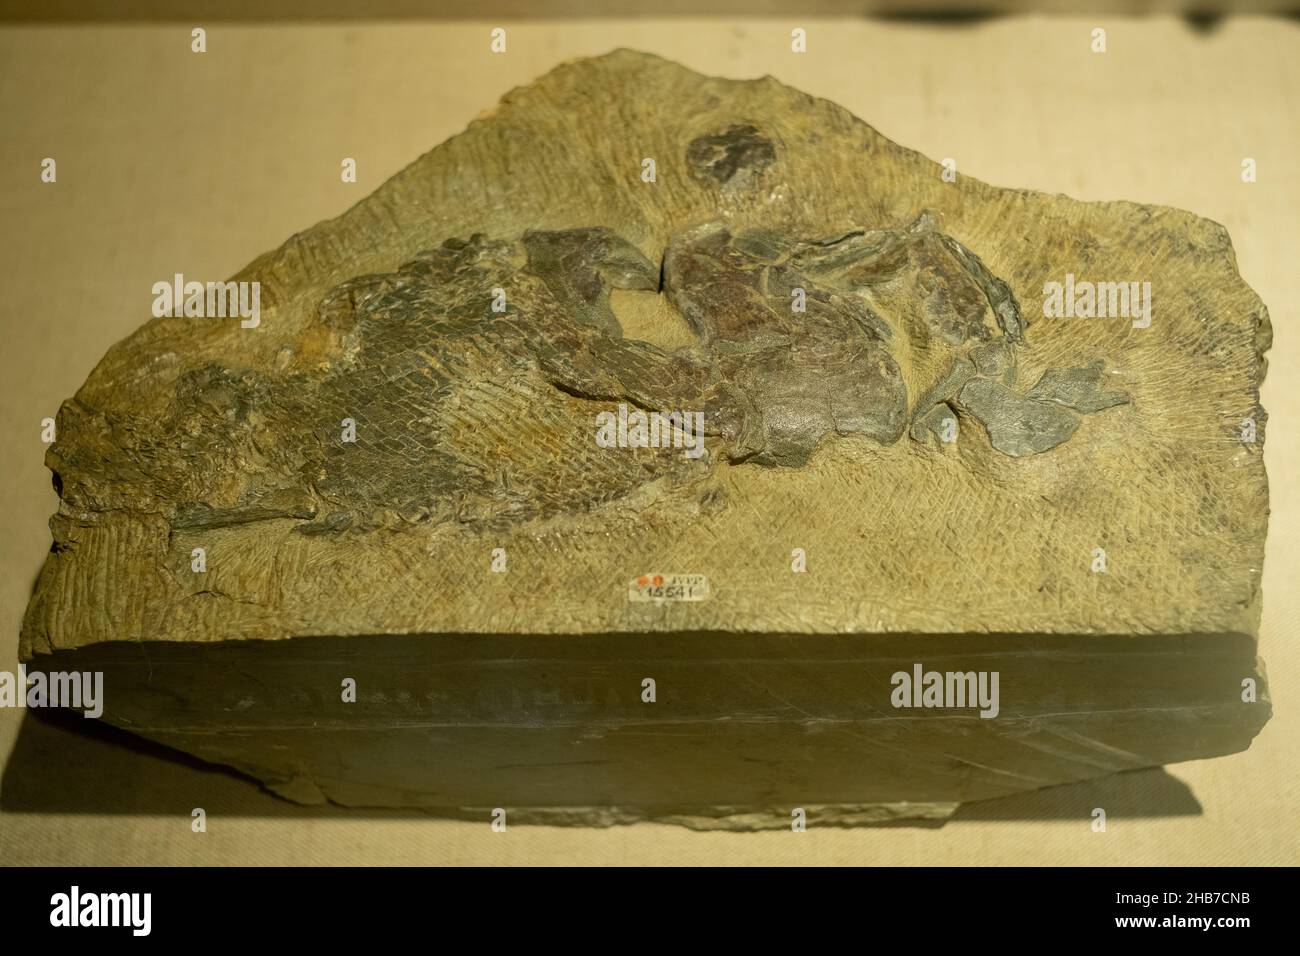 Fossil of Guiyu oneiros. Specimen museum of Institute of Vertebrate Paleontology and Paleoanthropology Chinese Academy of Sciences in Beijing. Stock Photo